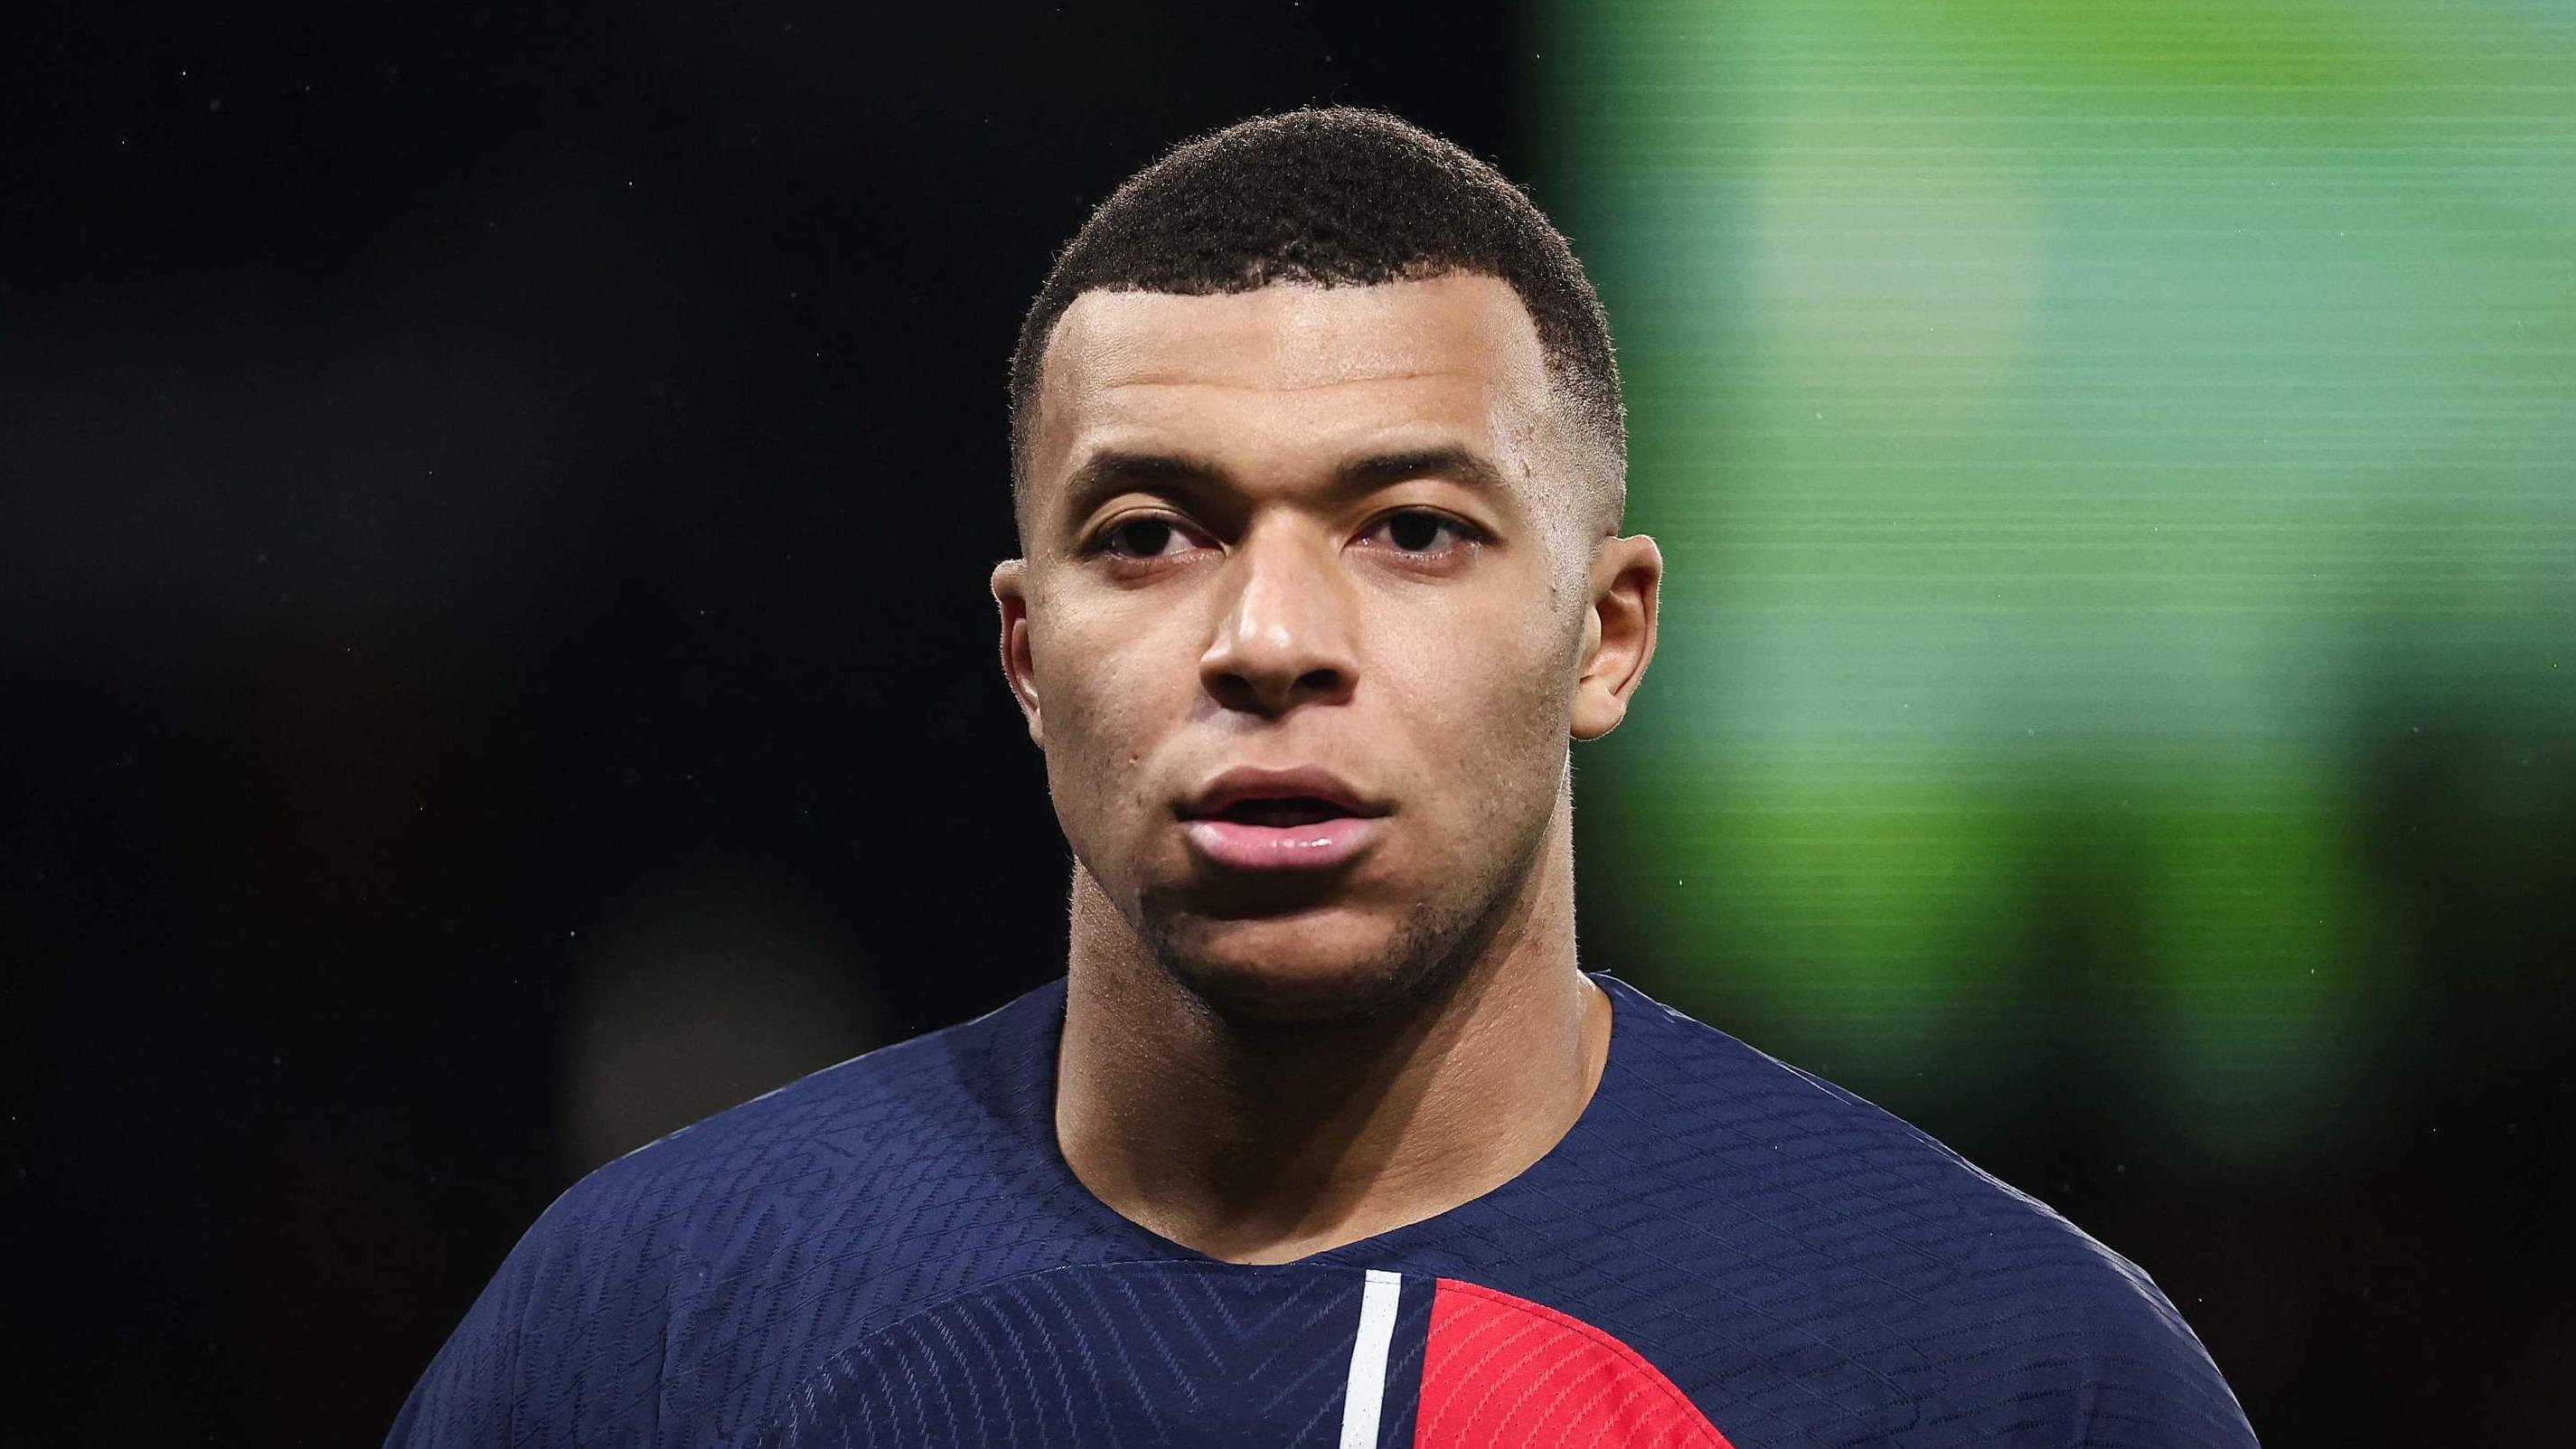 “I lost the spontaneity of the human being,” regrets Kylian Mbappé